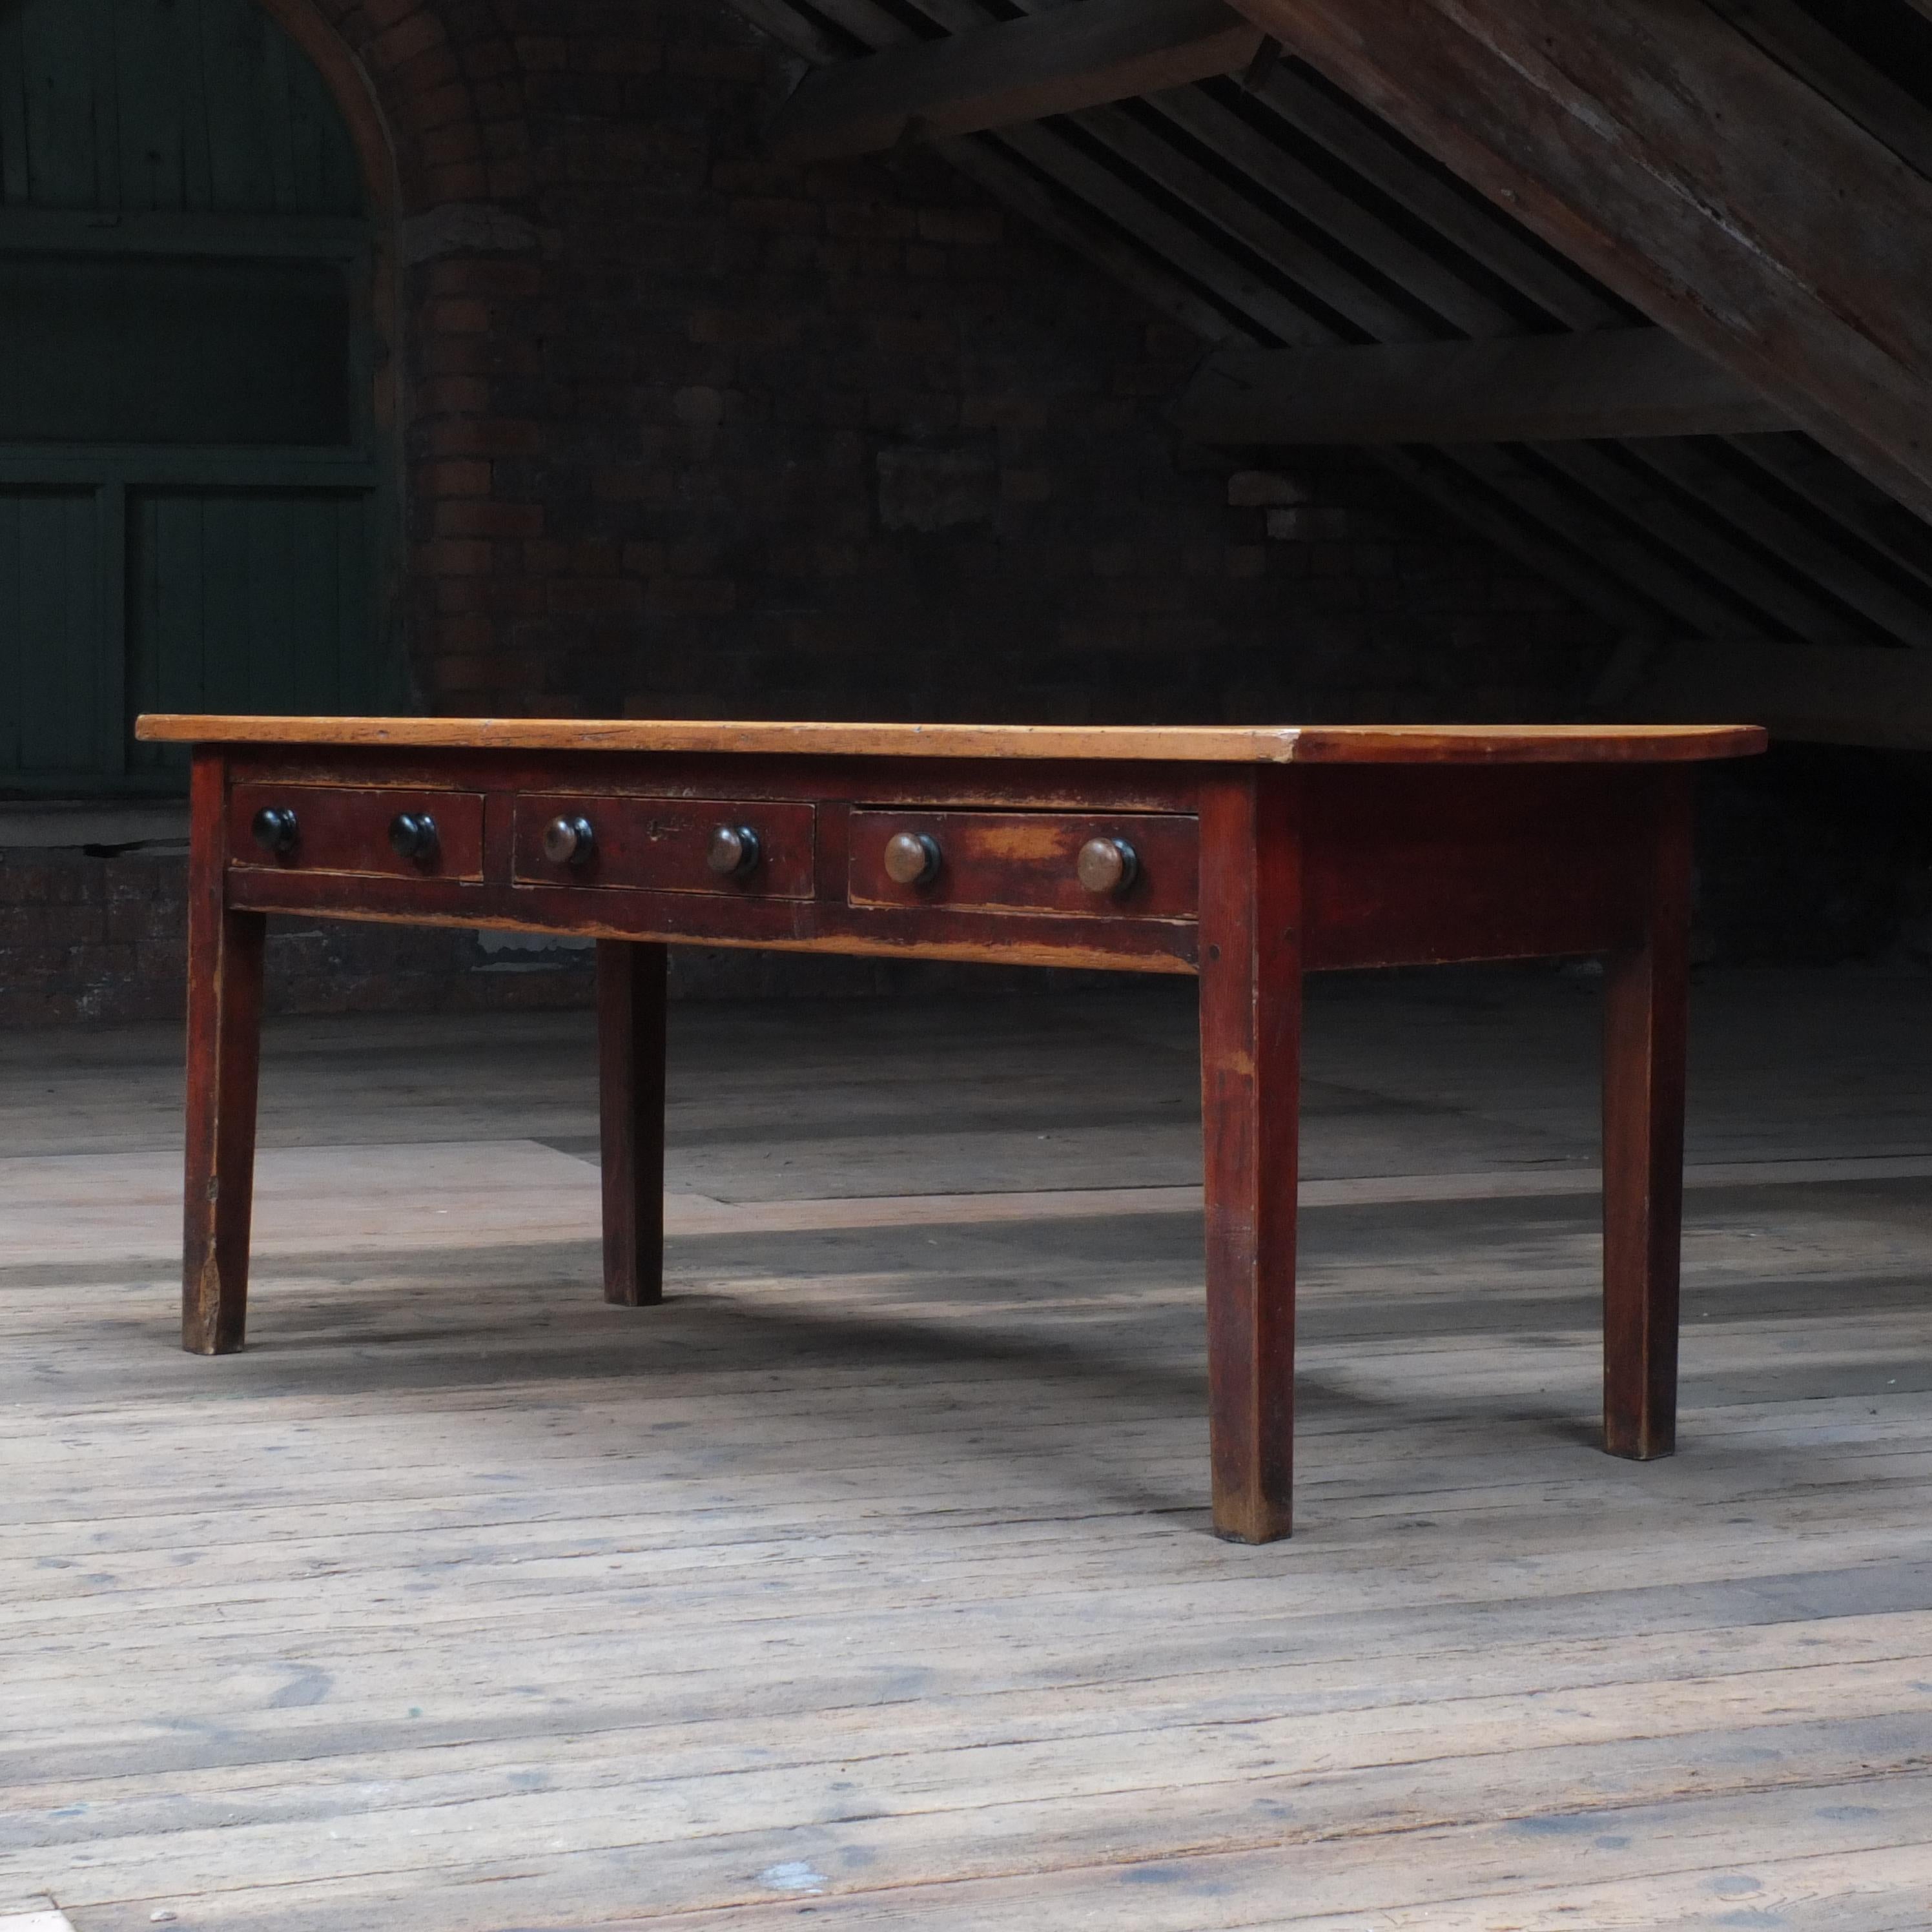 A 19th century pitch pine farm house prep table in beautifully time worn condition. In good structural condition throughout. Some historic worm to the top but its long gone and doesn't effect its use. This table was originally made to prepare food